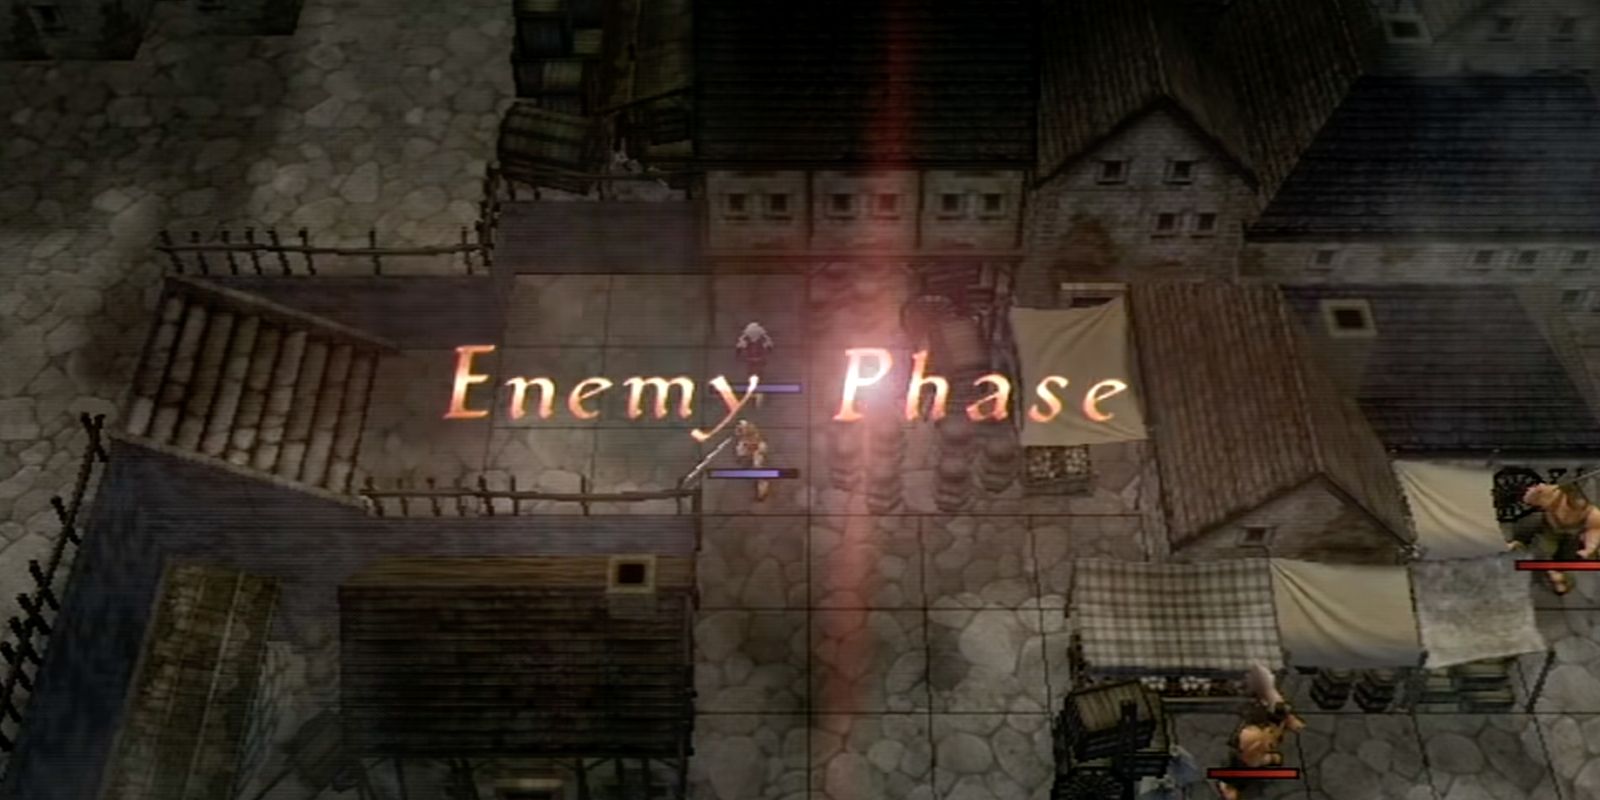 Fire Emblem Radiant Dawn Enemy Phase marker alert during combat in a cityscape.